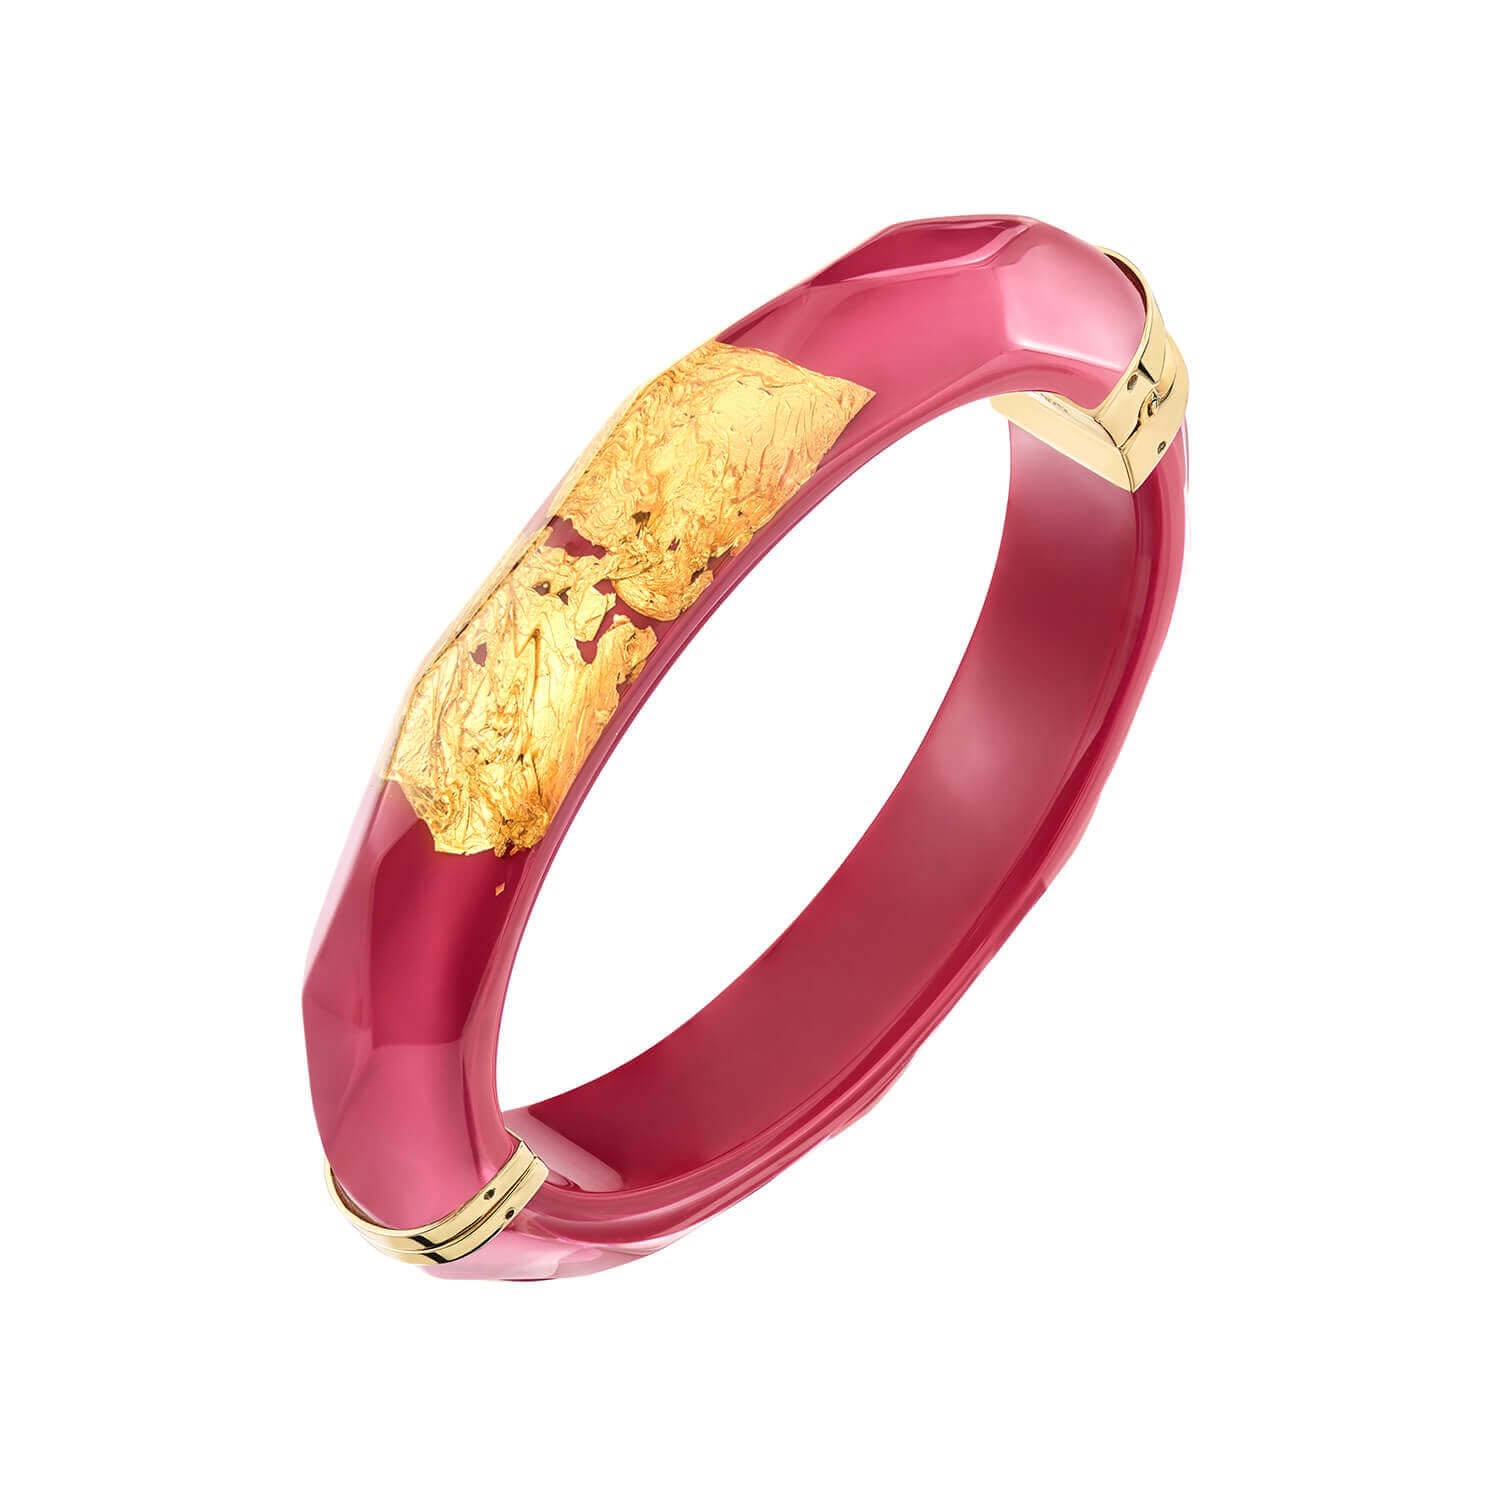 Women’s Pink / Purple / Gold 24K Gold Leaf Thin Lucite Bangle In Pink Gold & Honey